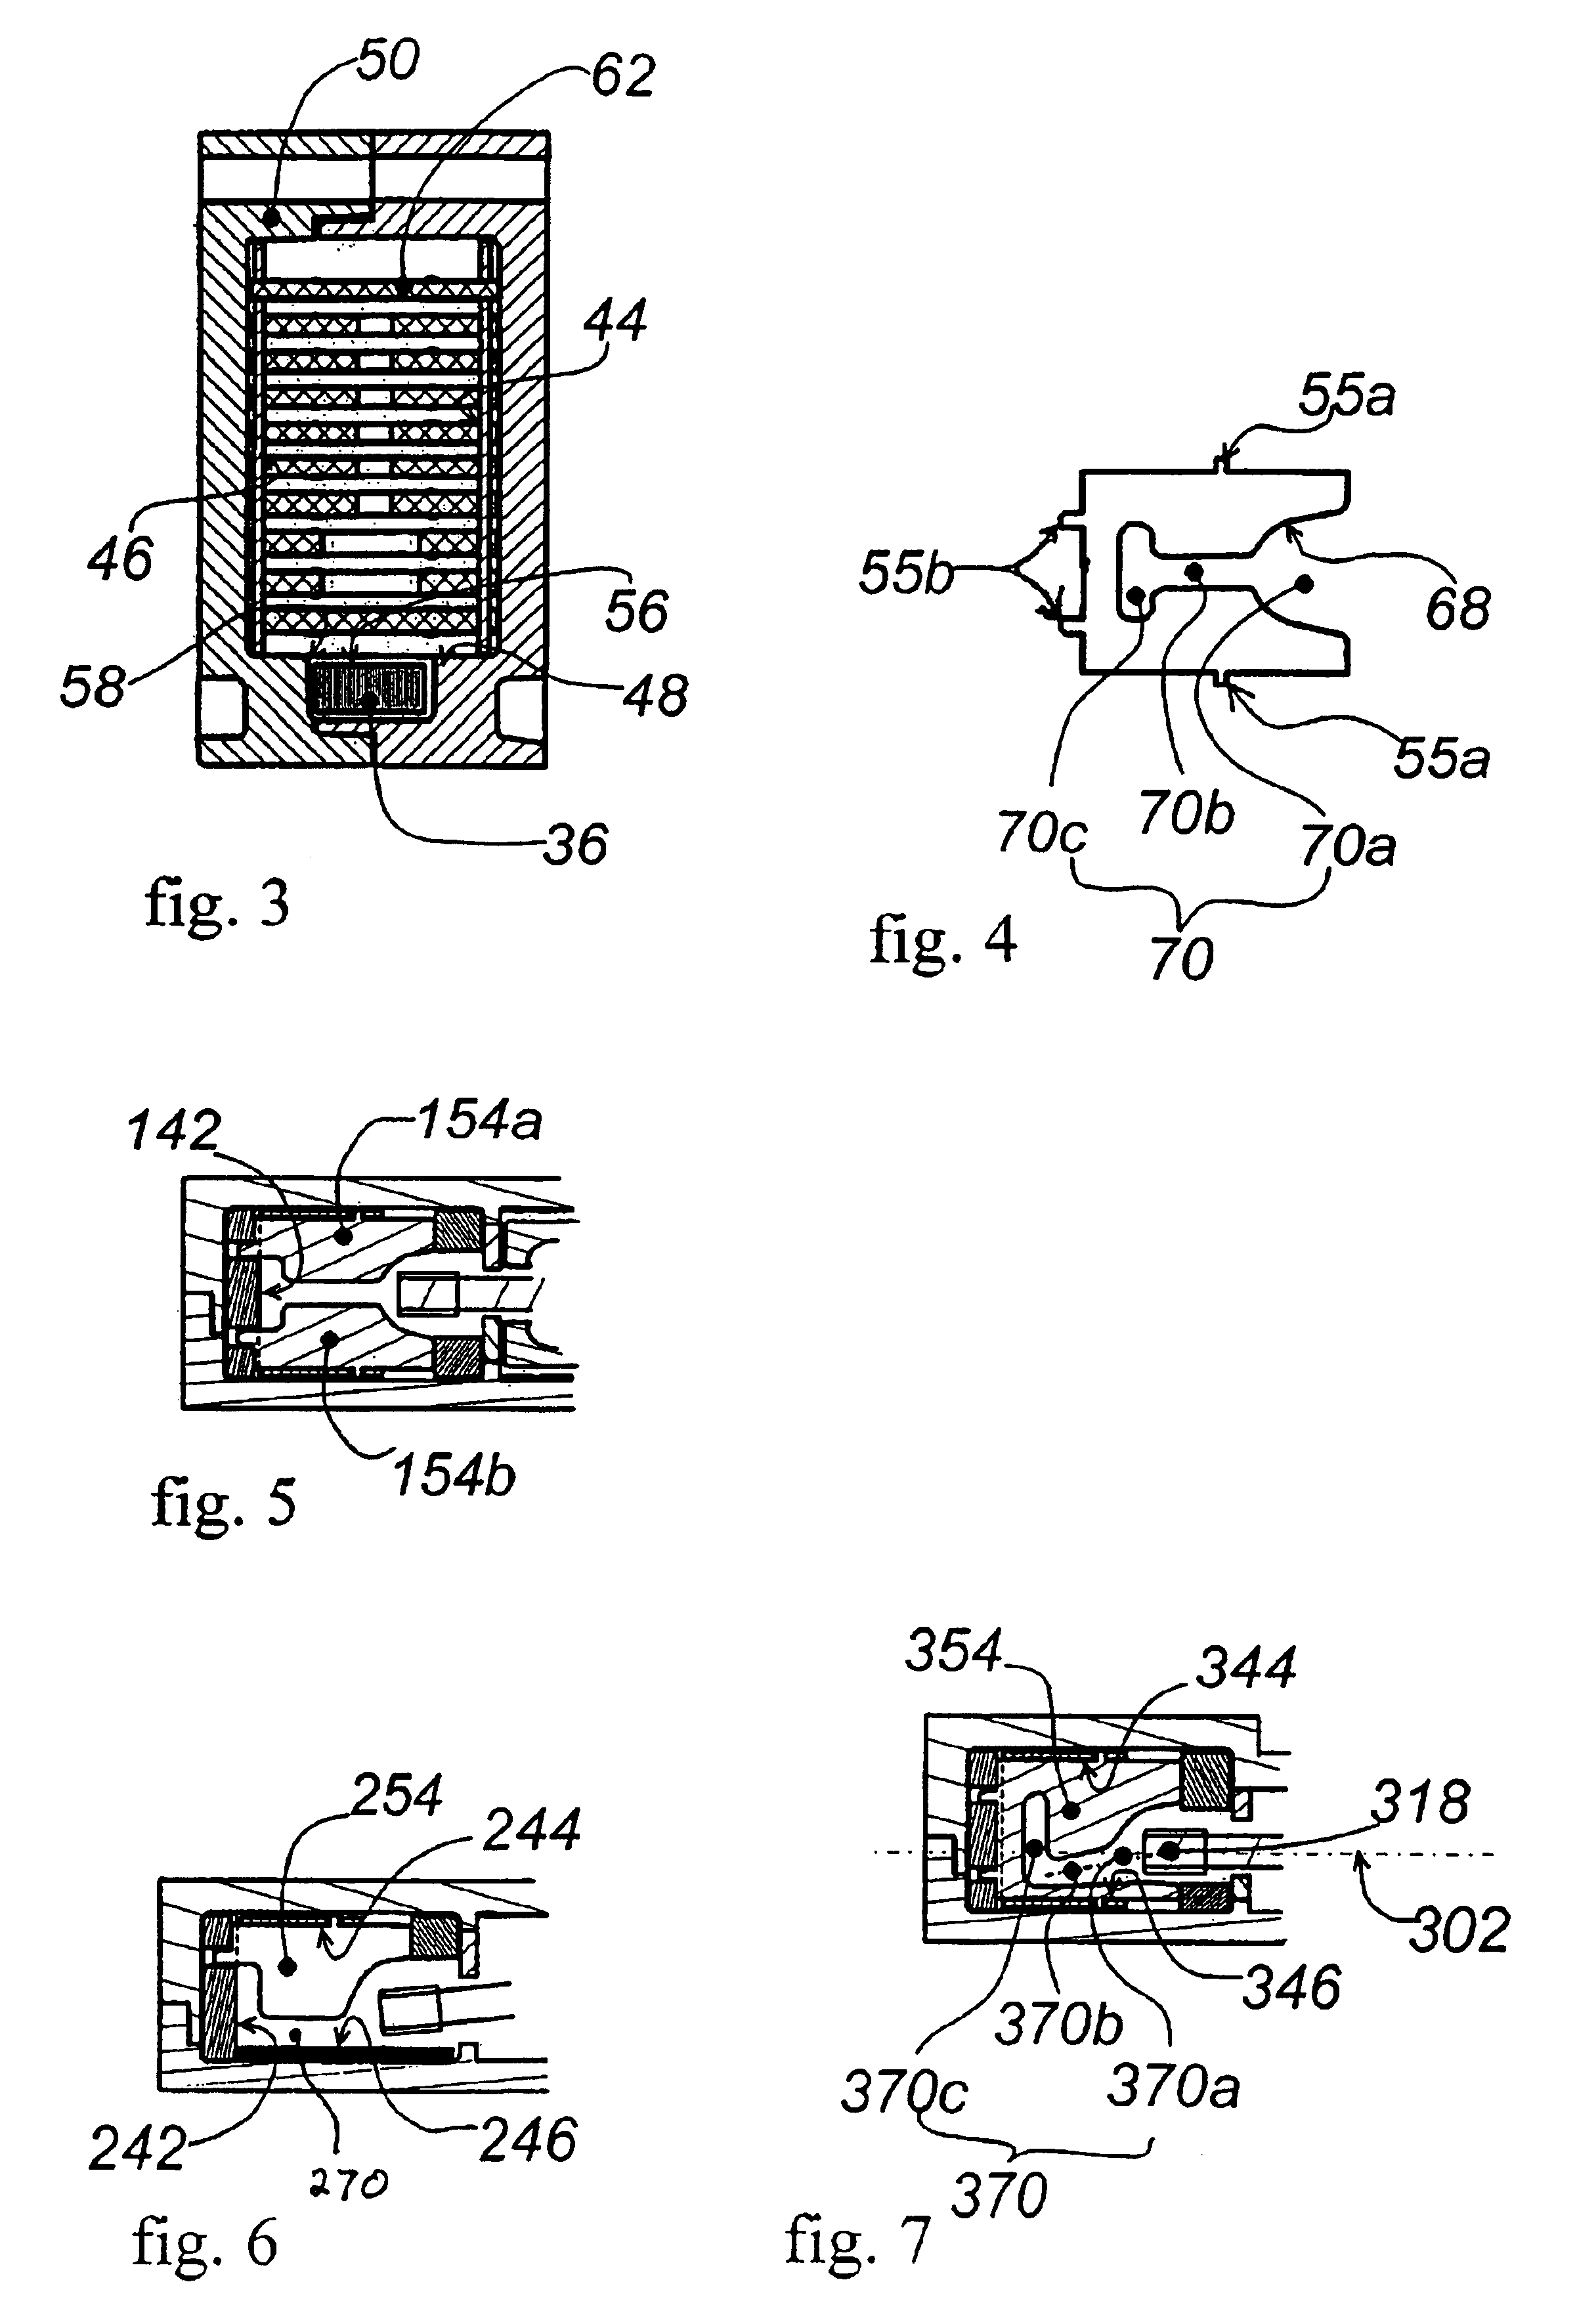 Electrical switchgear apparatus comprising an arc extinguishing chamber equipped with deionizing fins